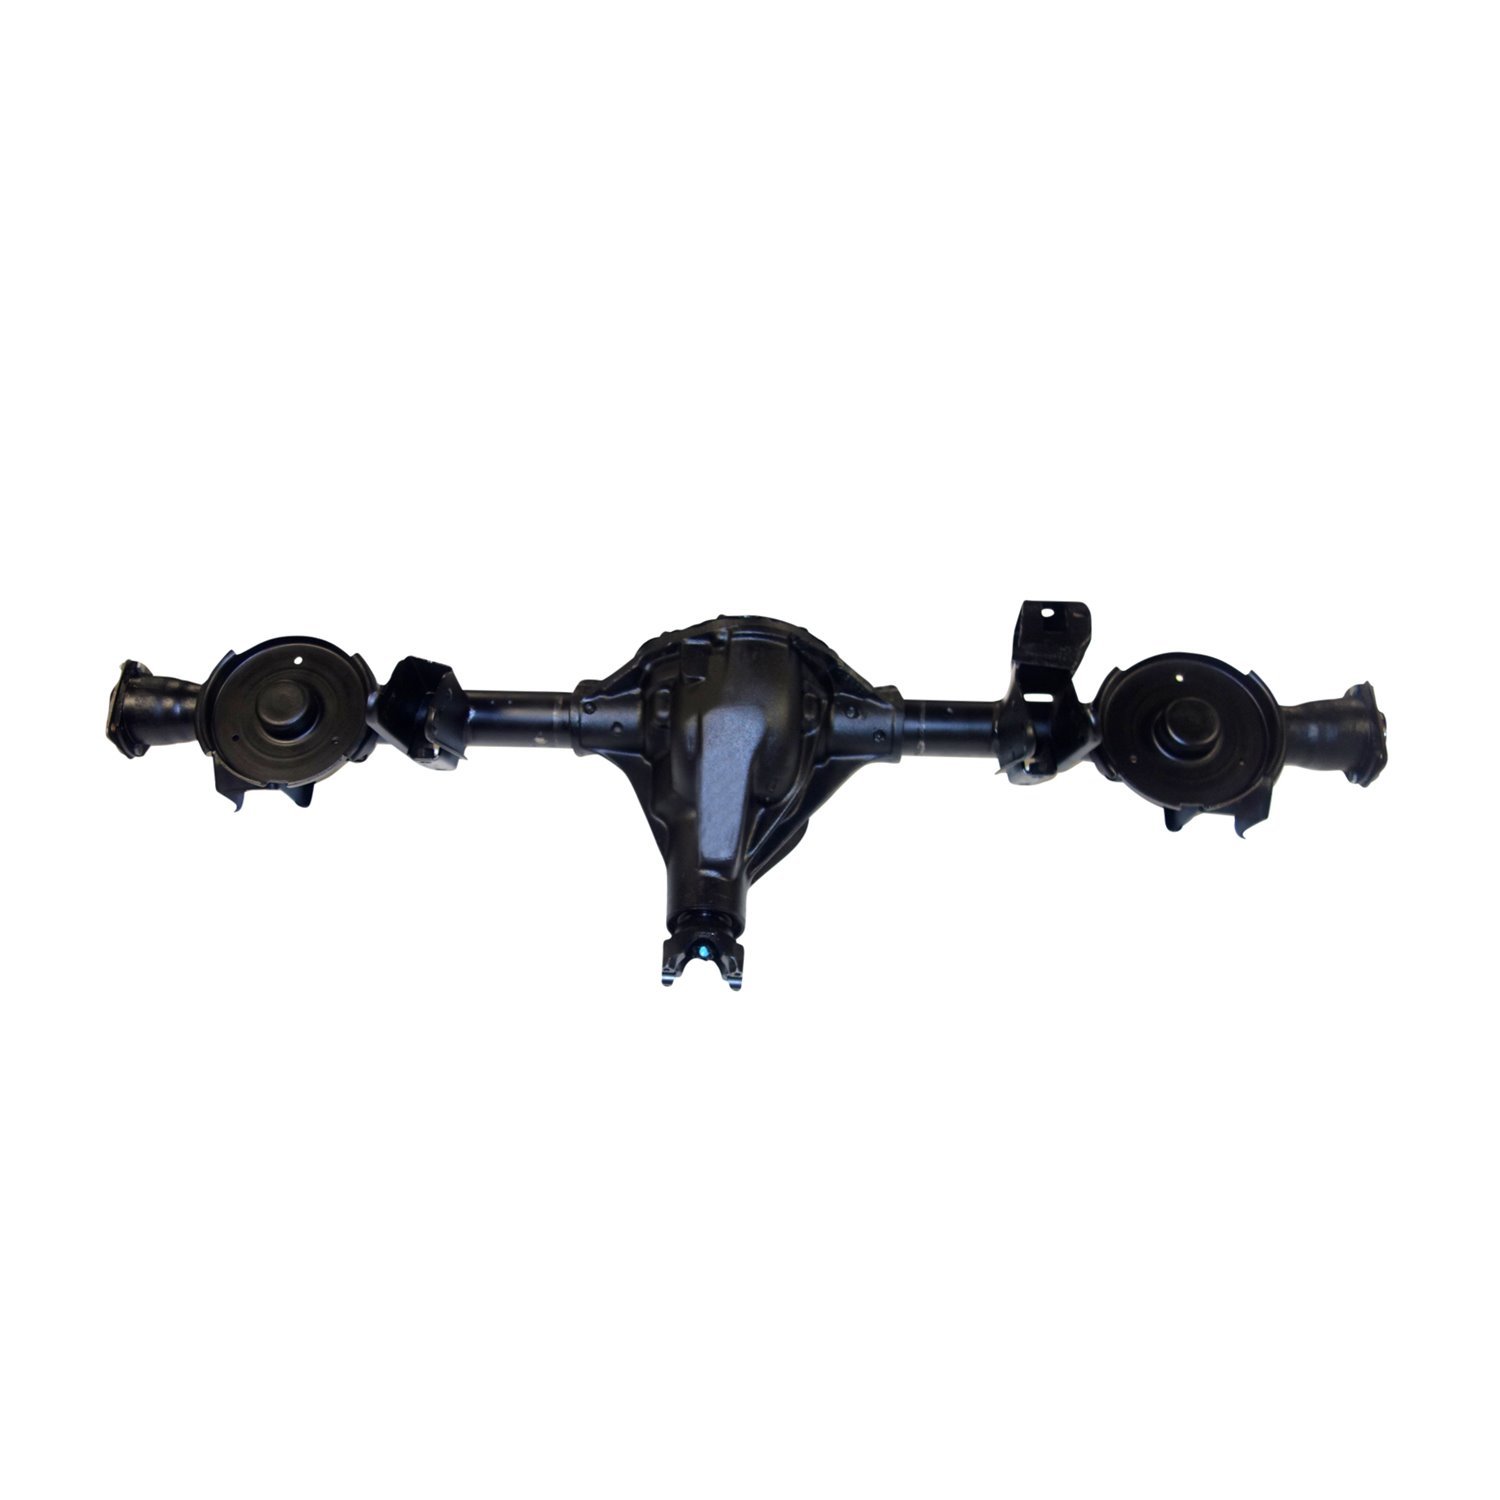 Remanufactured Complete Axle Assy for Dana 44 07-15 Wrangler 3.73 with Electric Locker